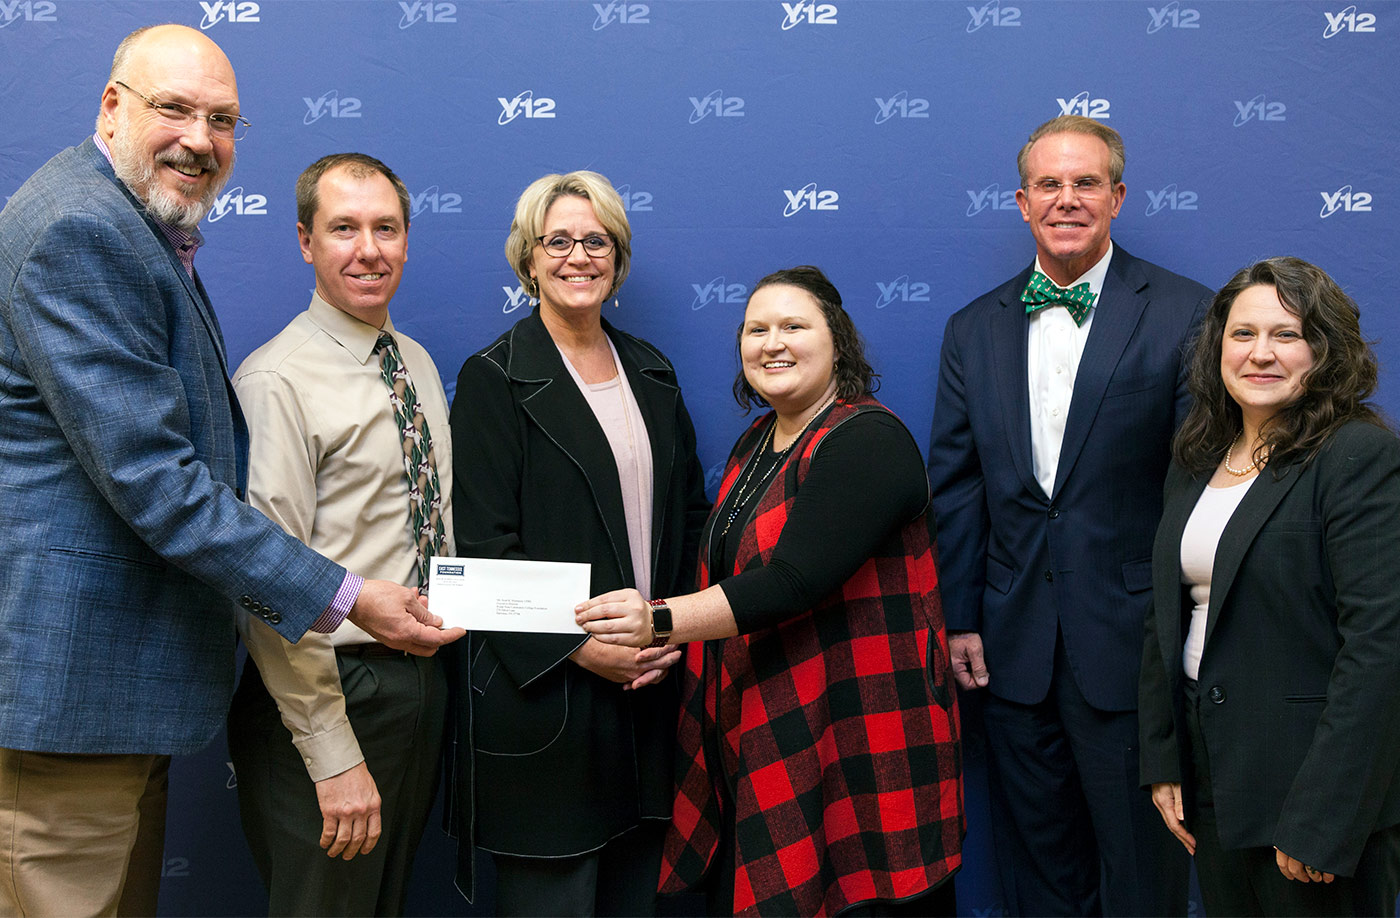 Making the grant presentation, from left: Robert Keen, chair of the Y-12 Employment Investment Advisory Committee; Scott Niermann, executive director of the Roane State Foundation; Teresa Duncan, Roane State vice president of workforce development and director of the college’s Oak Ridge Branch Campus; Meghan Lovelace, committee secretary; Mike McClamroch, East Tennessee Foundation president and CEO; and Amy Wilson, CNS senior director of transformation.